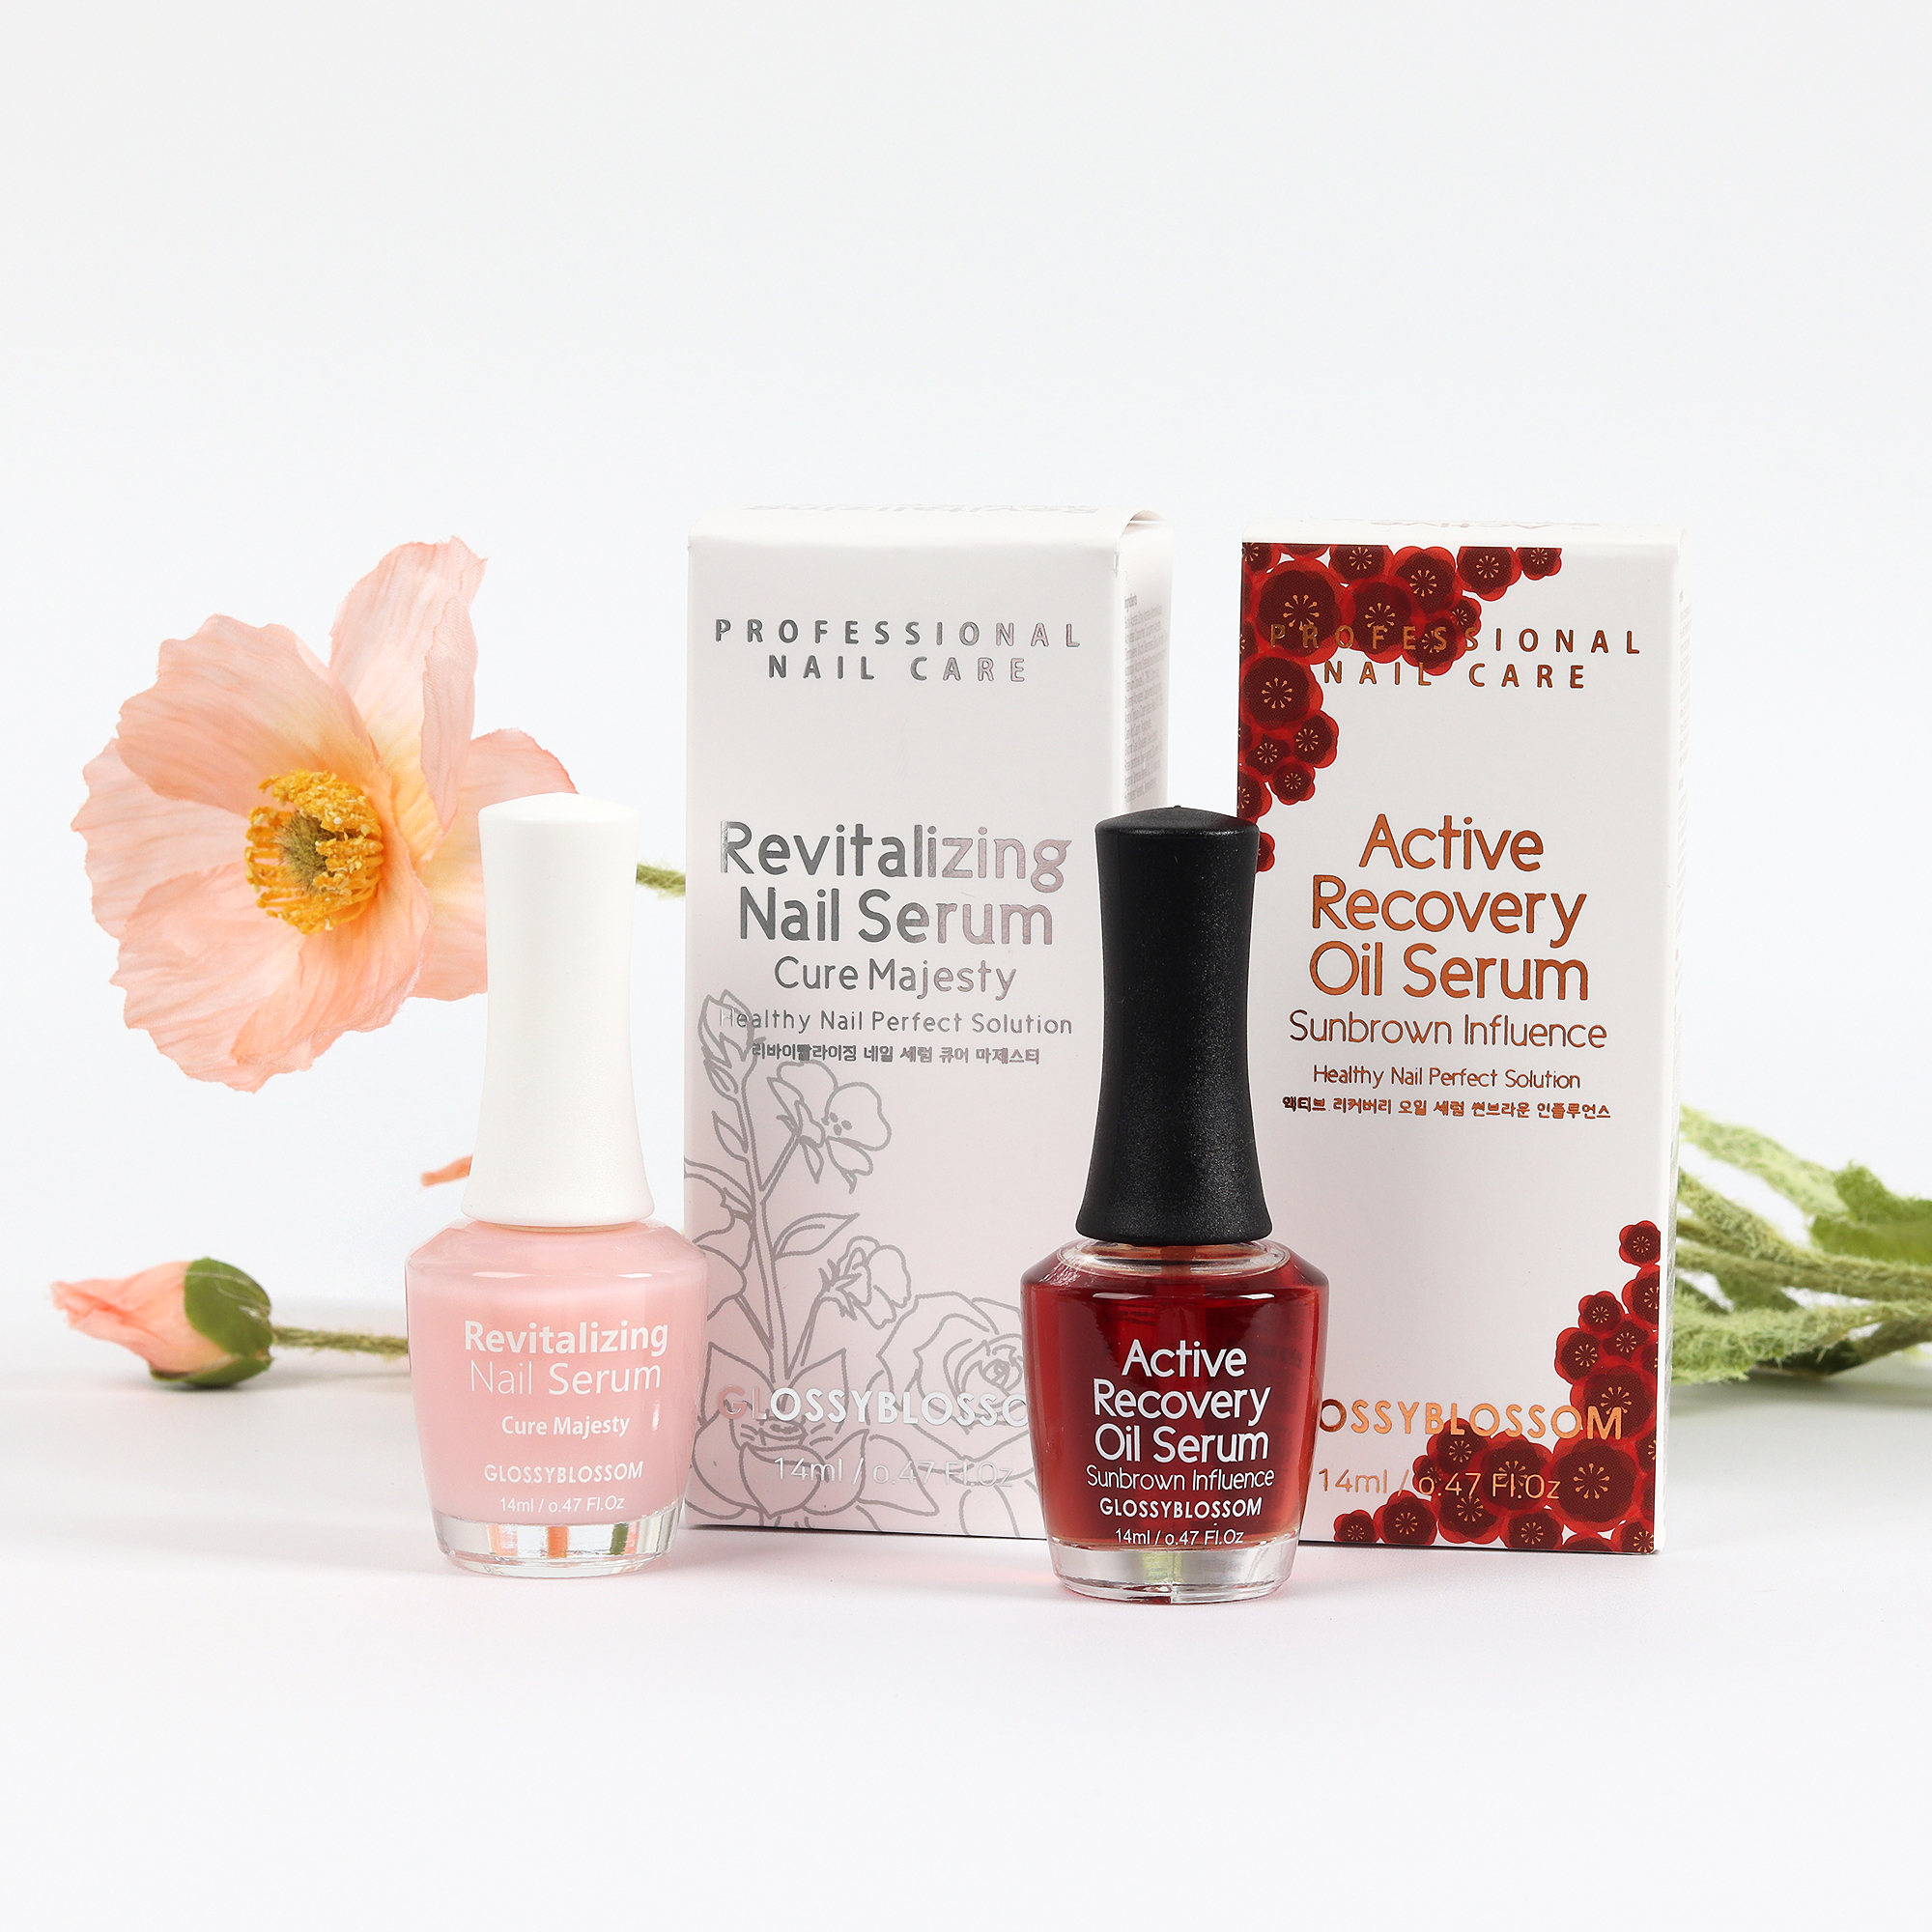 [45213] Revitalizing Nail Serum / [45754] Active Recovery Oil Serum